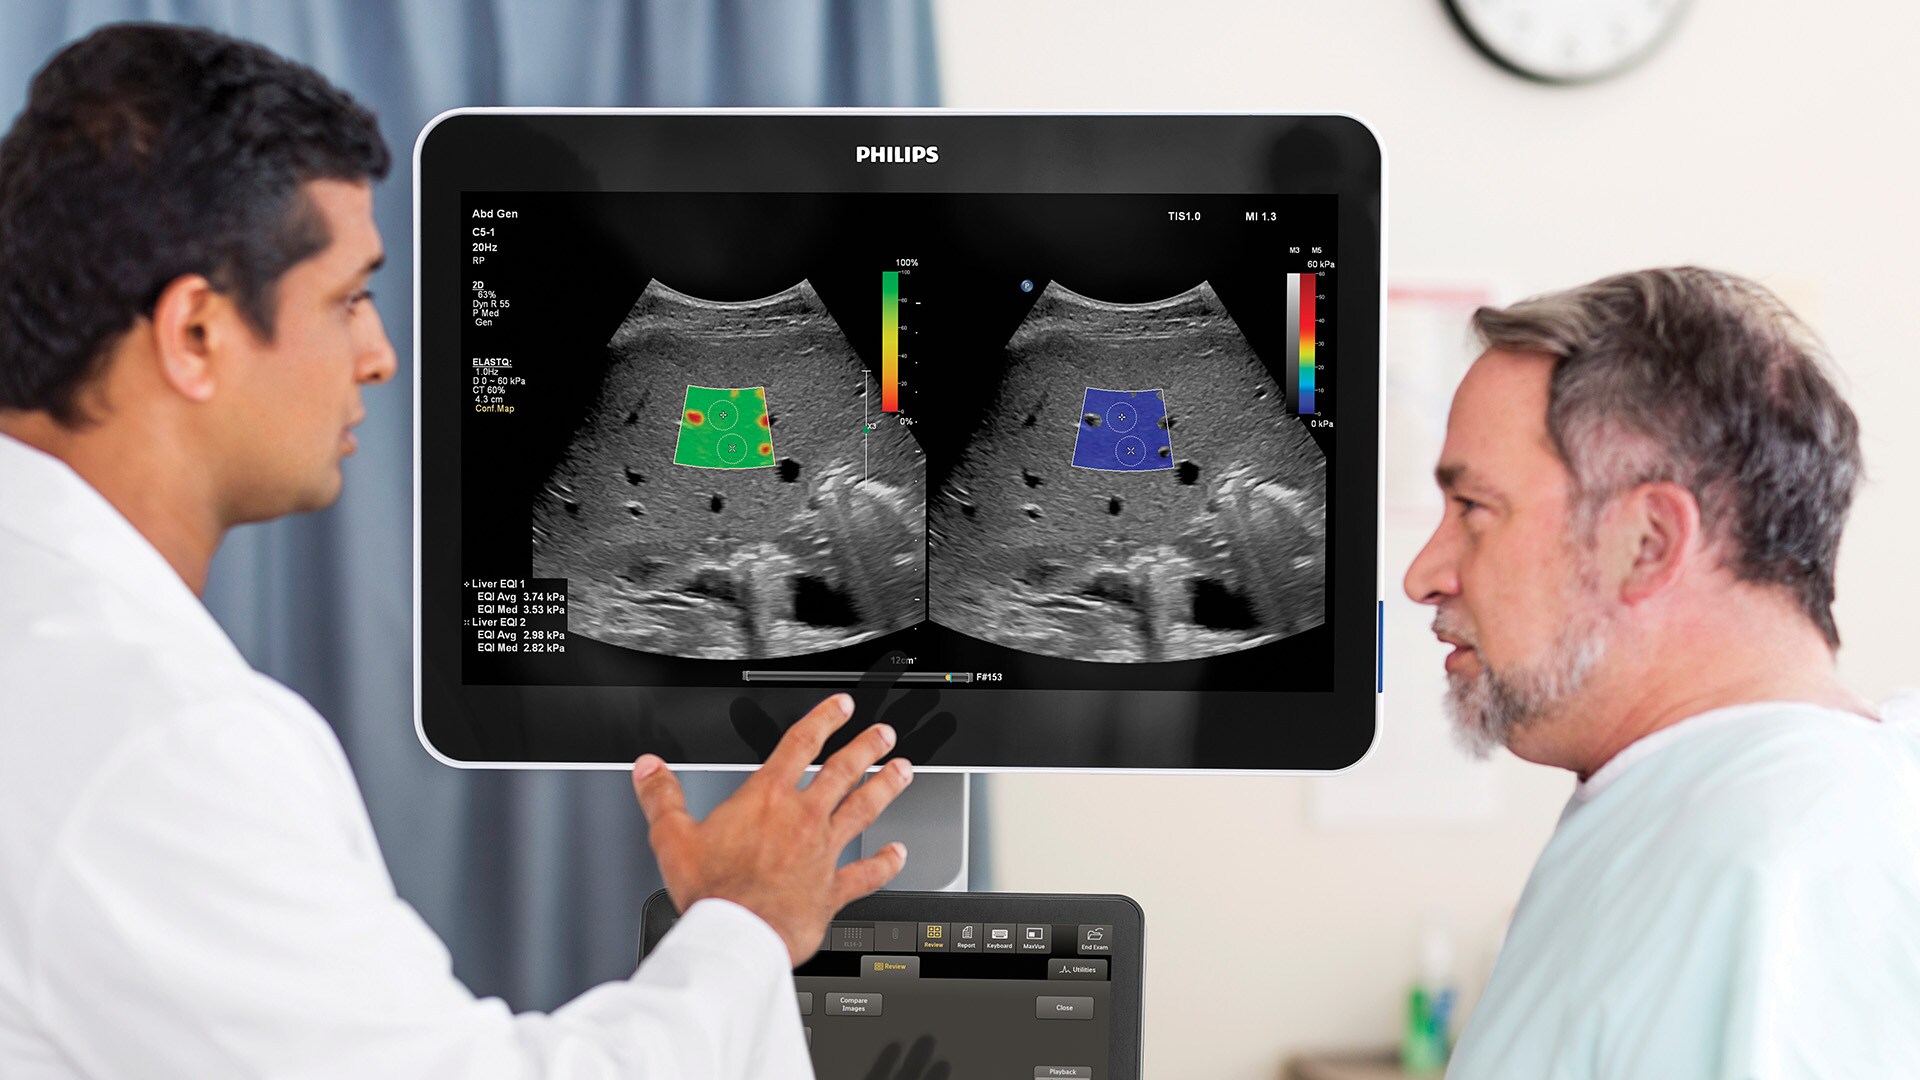 Philips advances ultrasound portfolio with new robust imaging tools and features for Radiology to increase diagnostic confidence and workflow efficiency